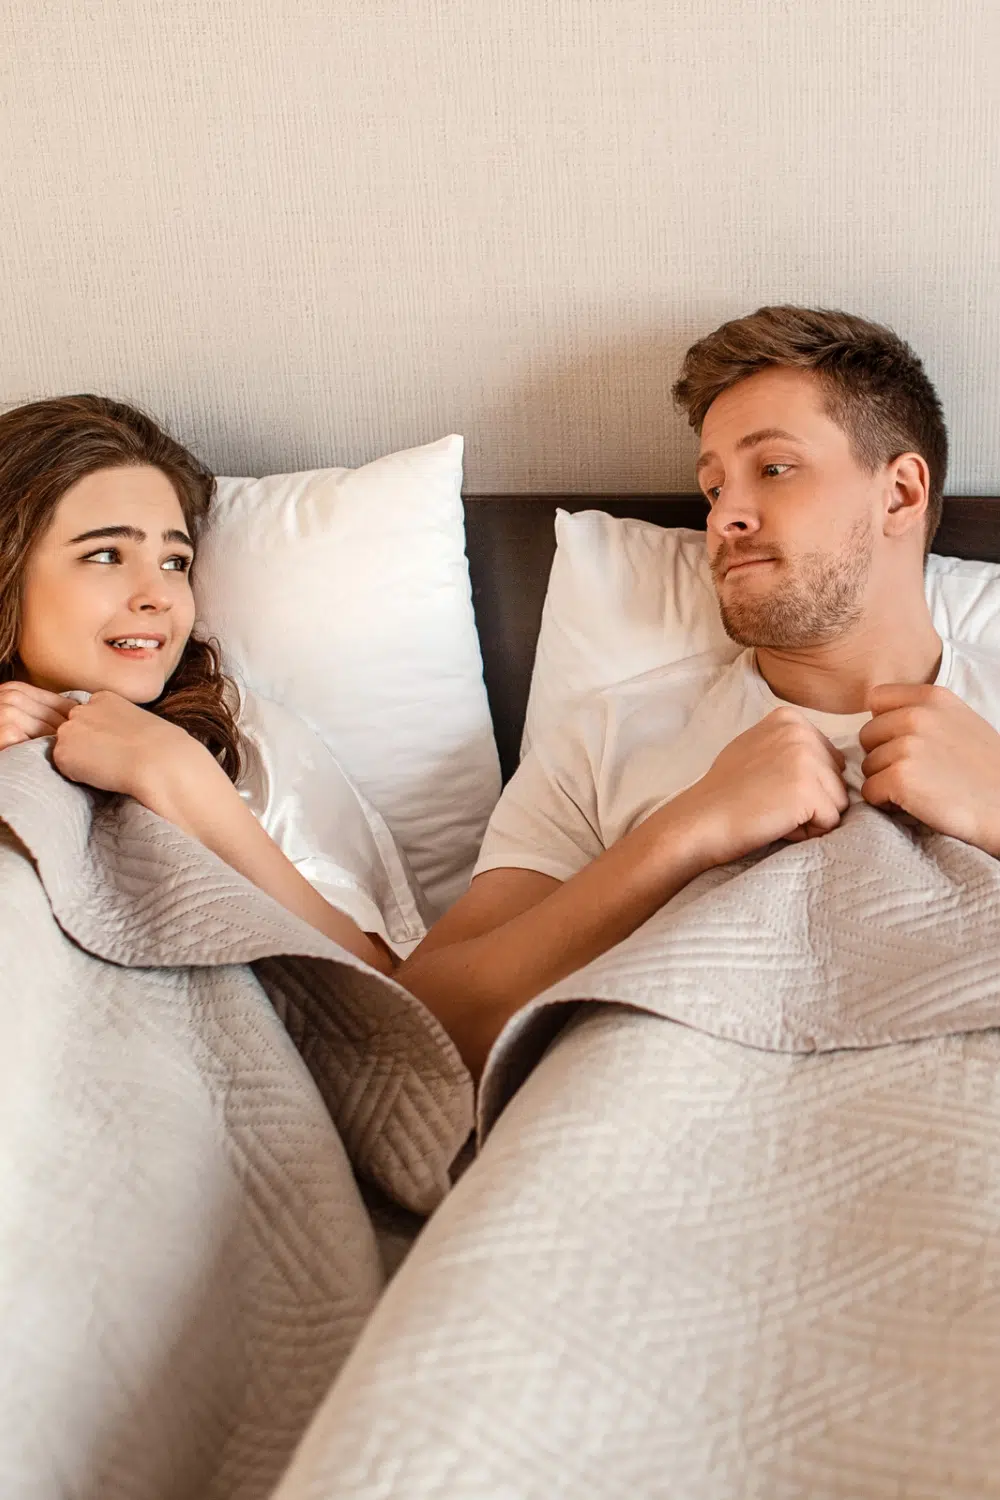 Reasons Husbands Stop Taking Initiative in the Bedroom